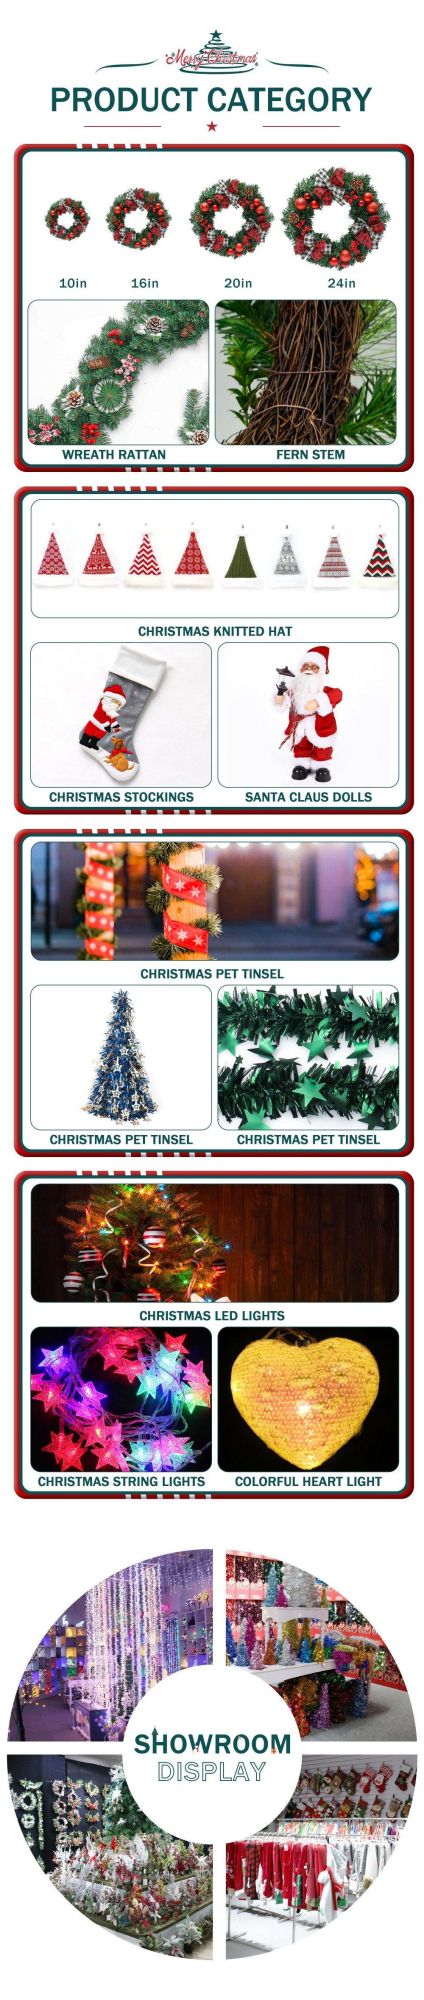 New Design Pet Material Tinsel Garland with Ornaments Decorate